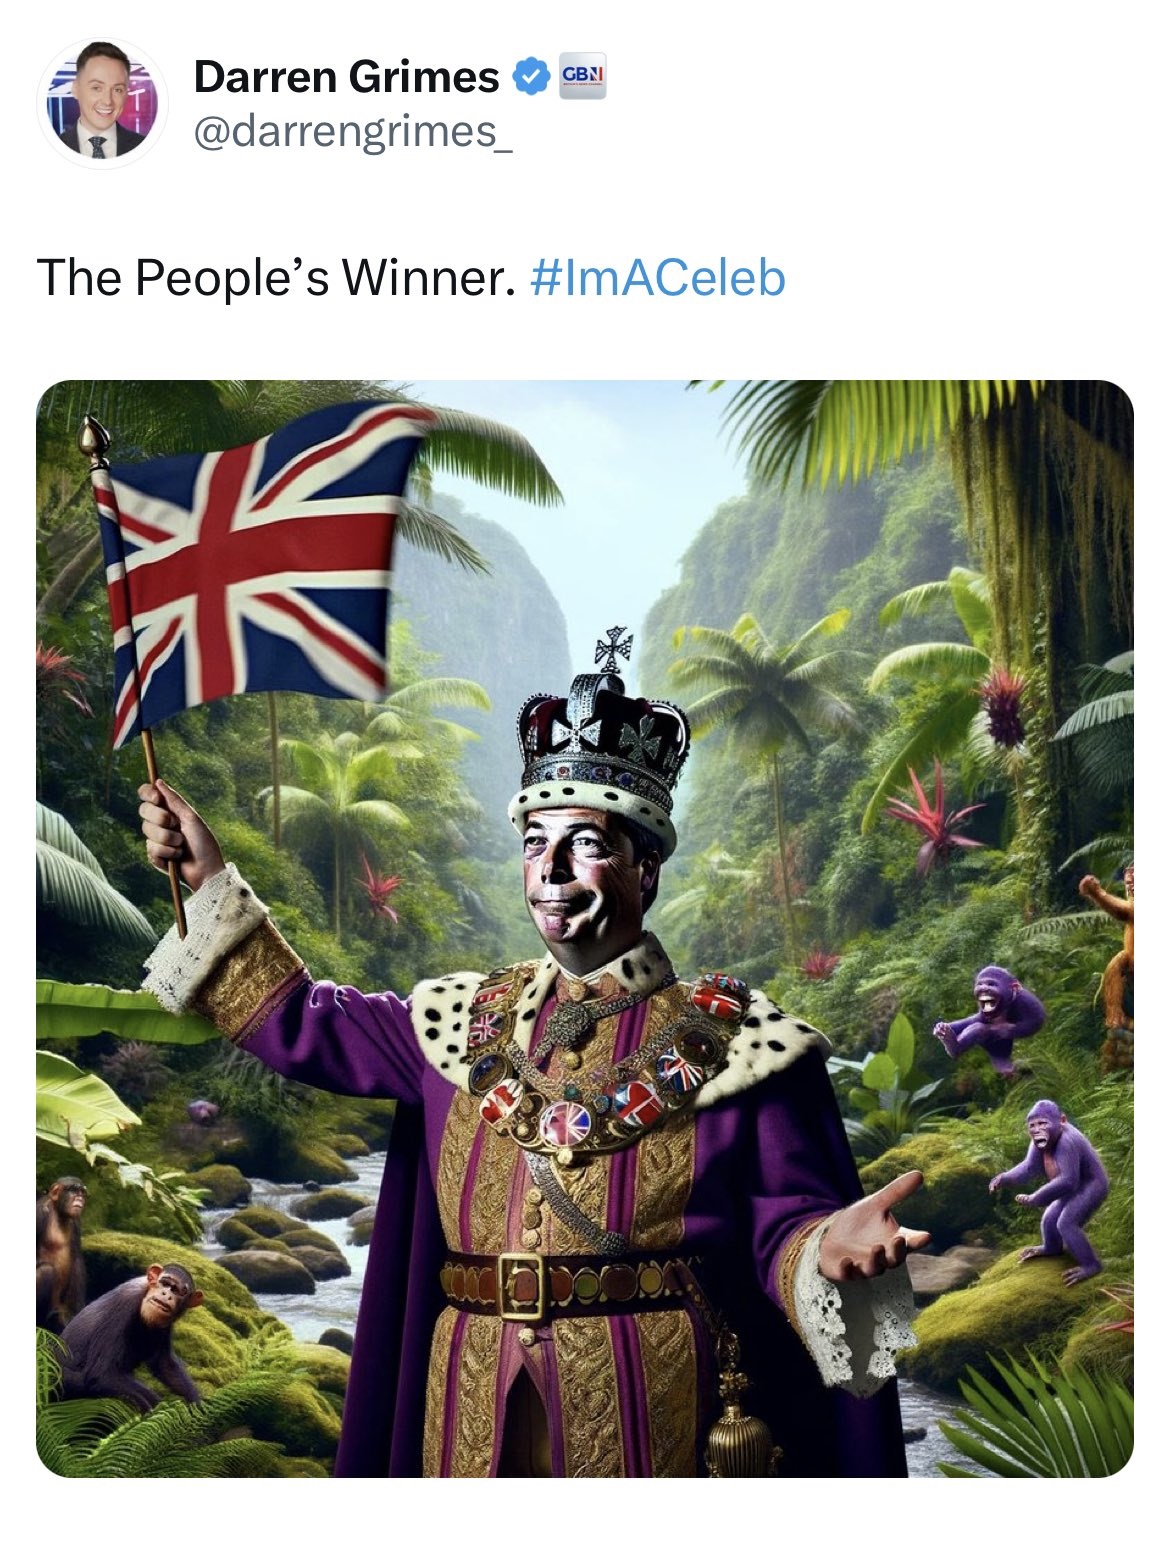 Darren Grimes AI image of Farage dressed as a king, with the text The people's winner